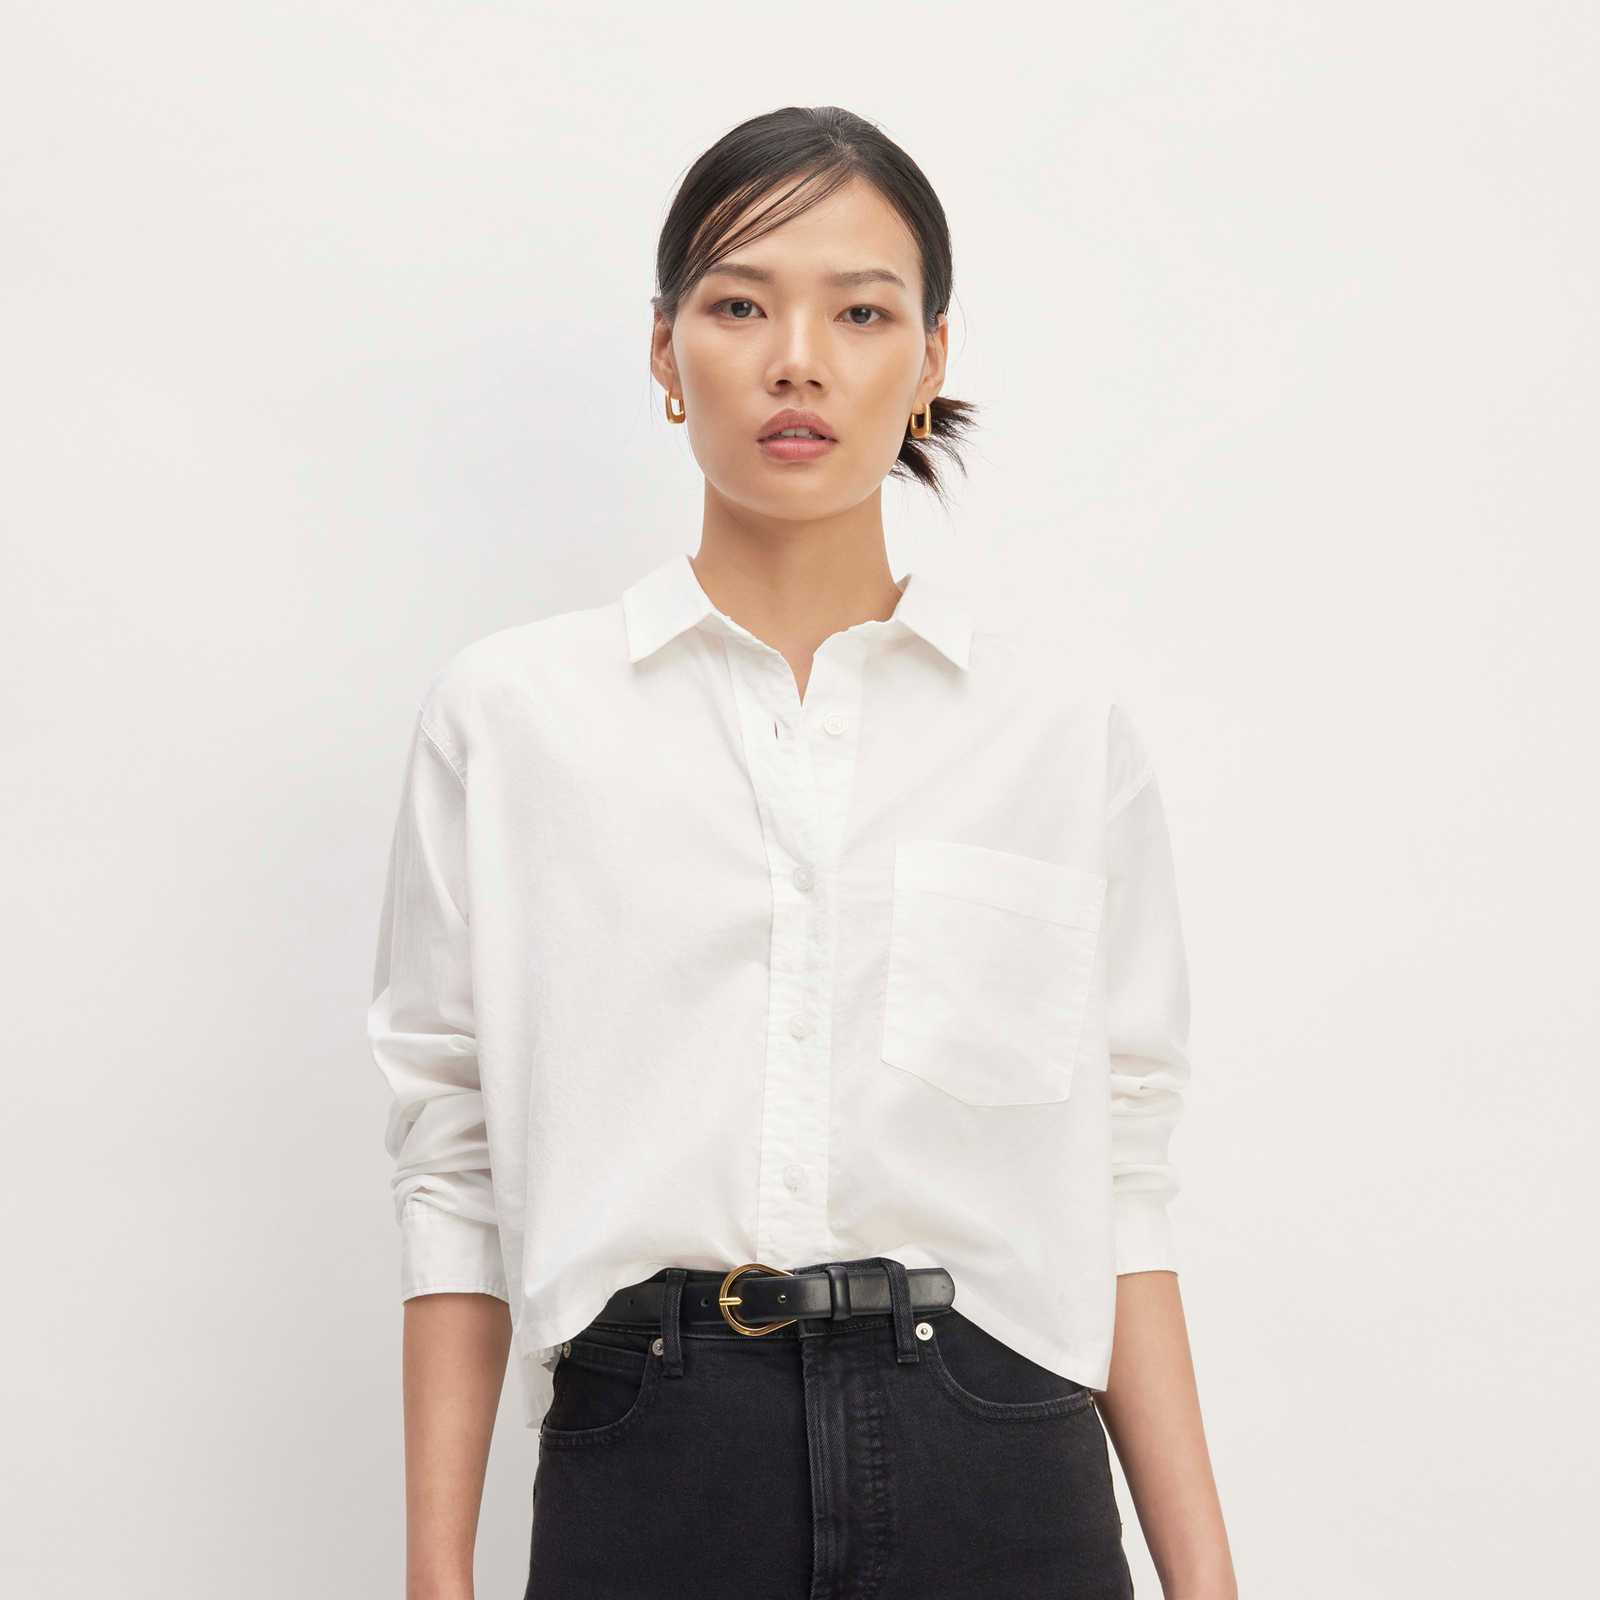 Best White Button-Down Shirts for Women: 10 Classic Options for Every ...